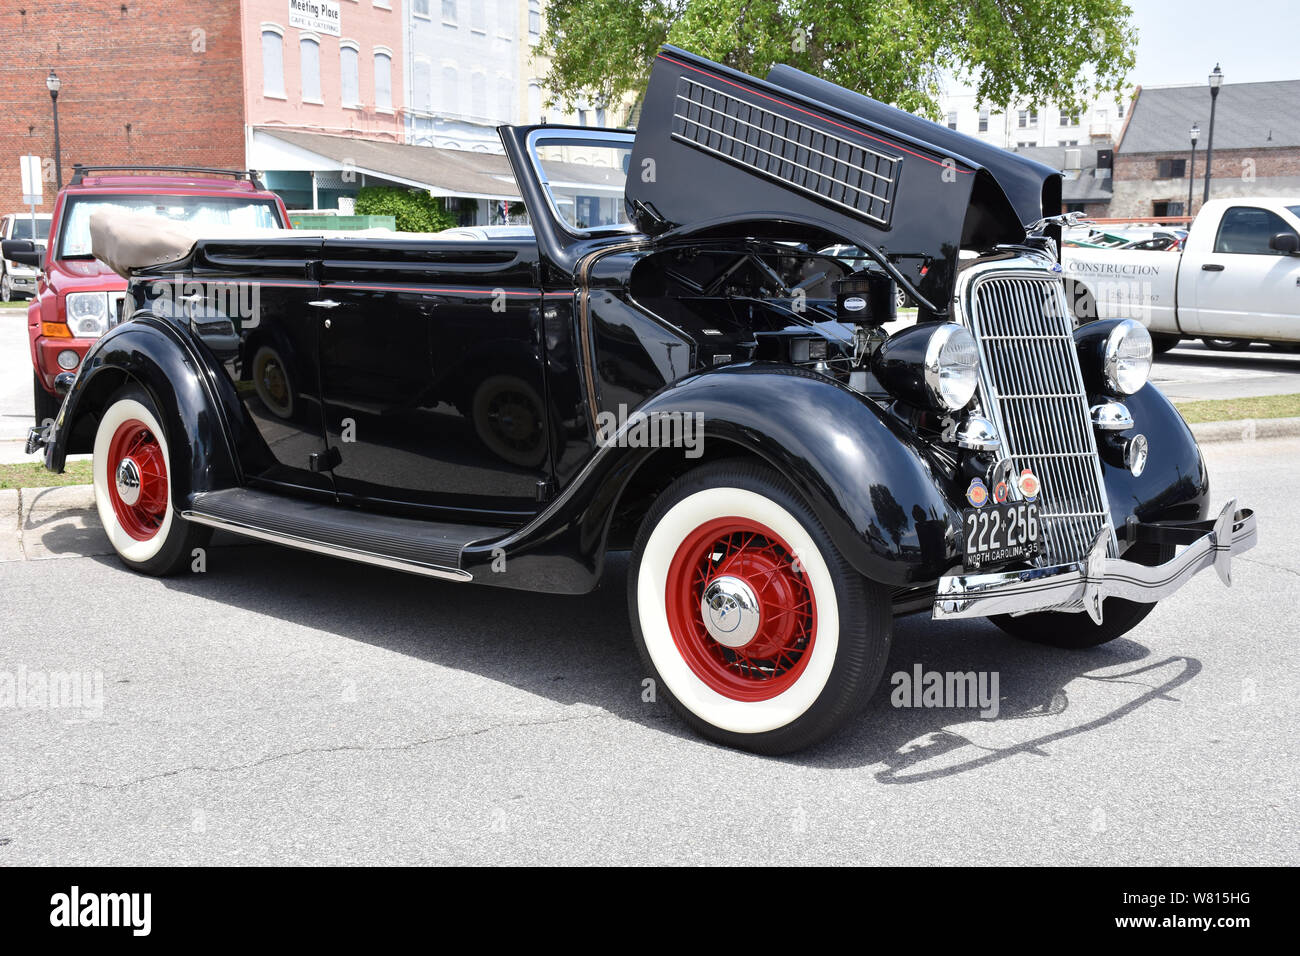 A 1935 Ford four door comvertible on display at a car show. Stock Photo